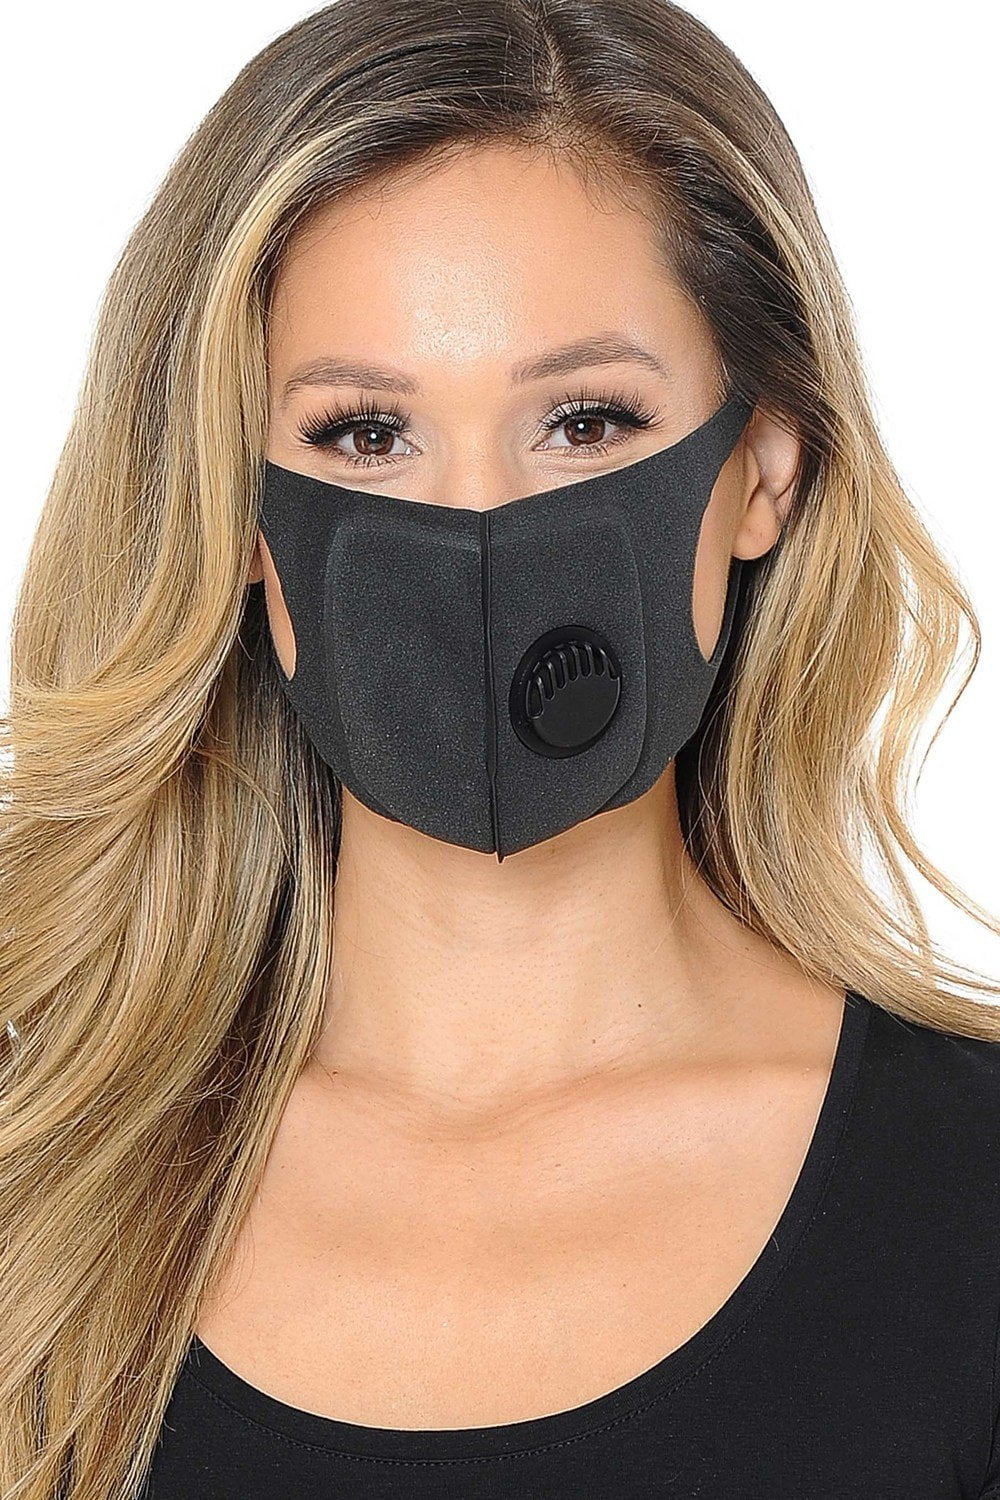 OxyBreath Pro Face Mask  Breathing mask, Air filter mask, Anti pollution  mask